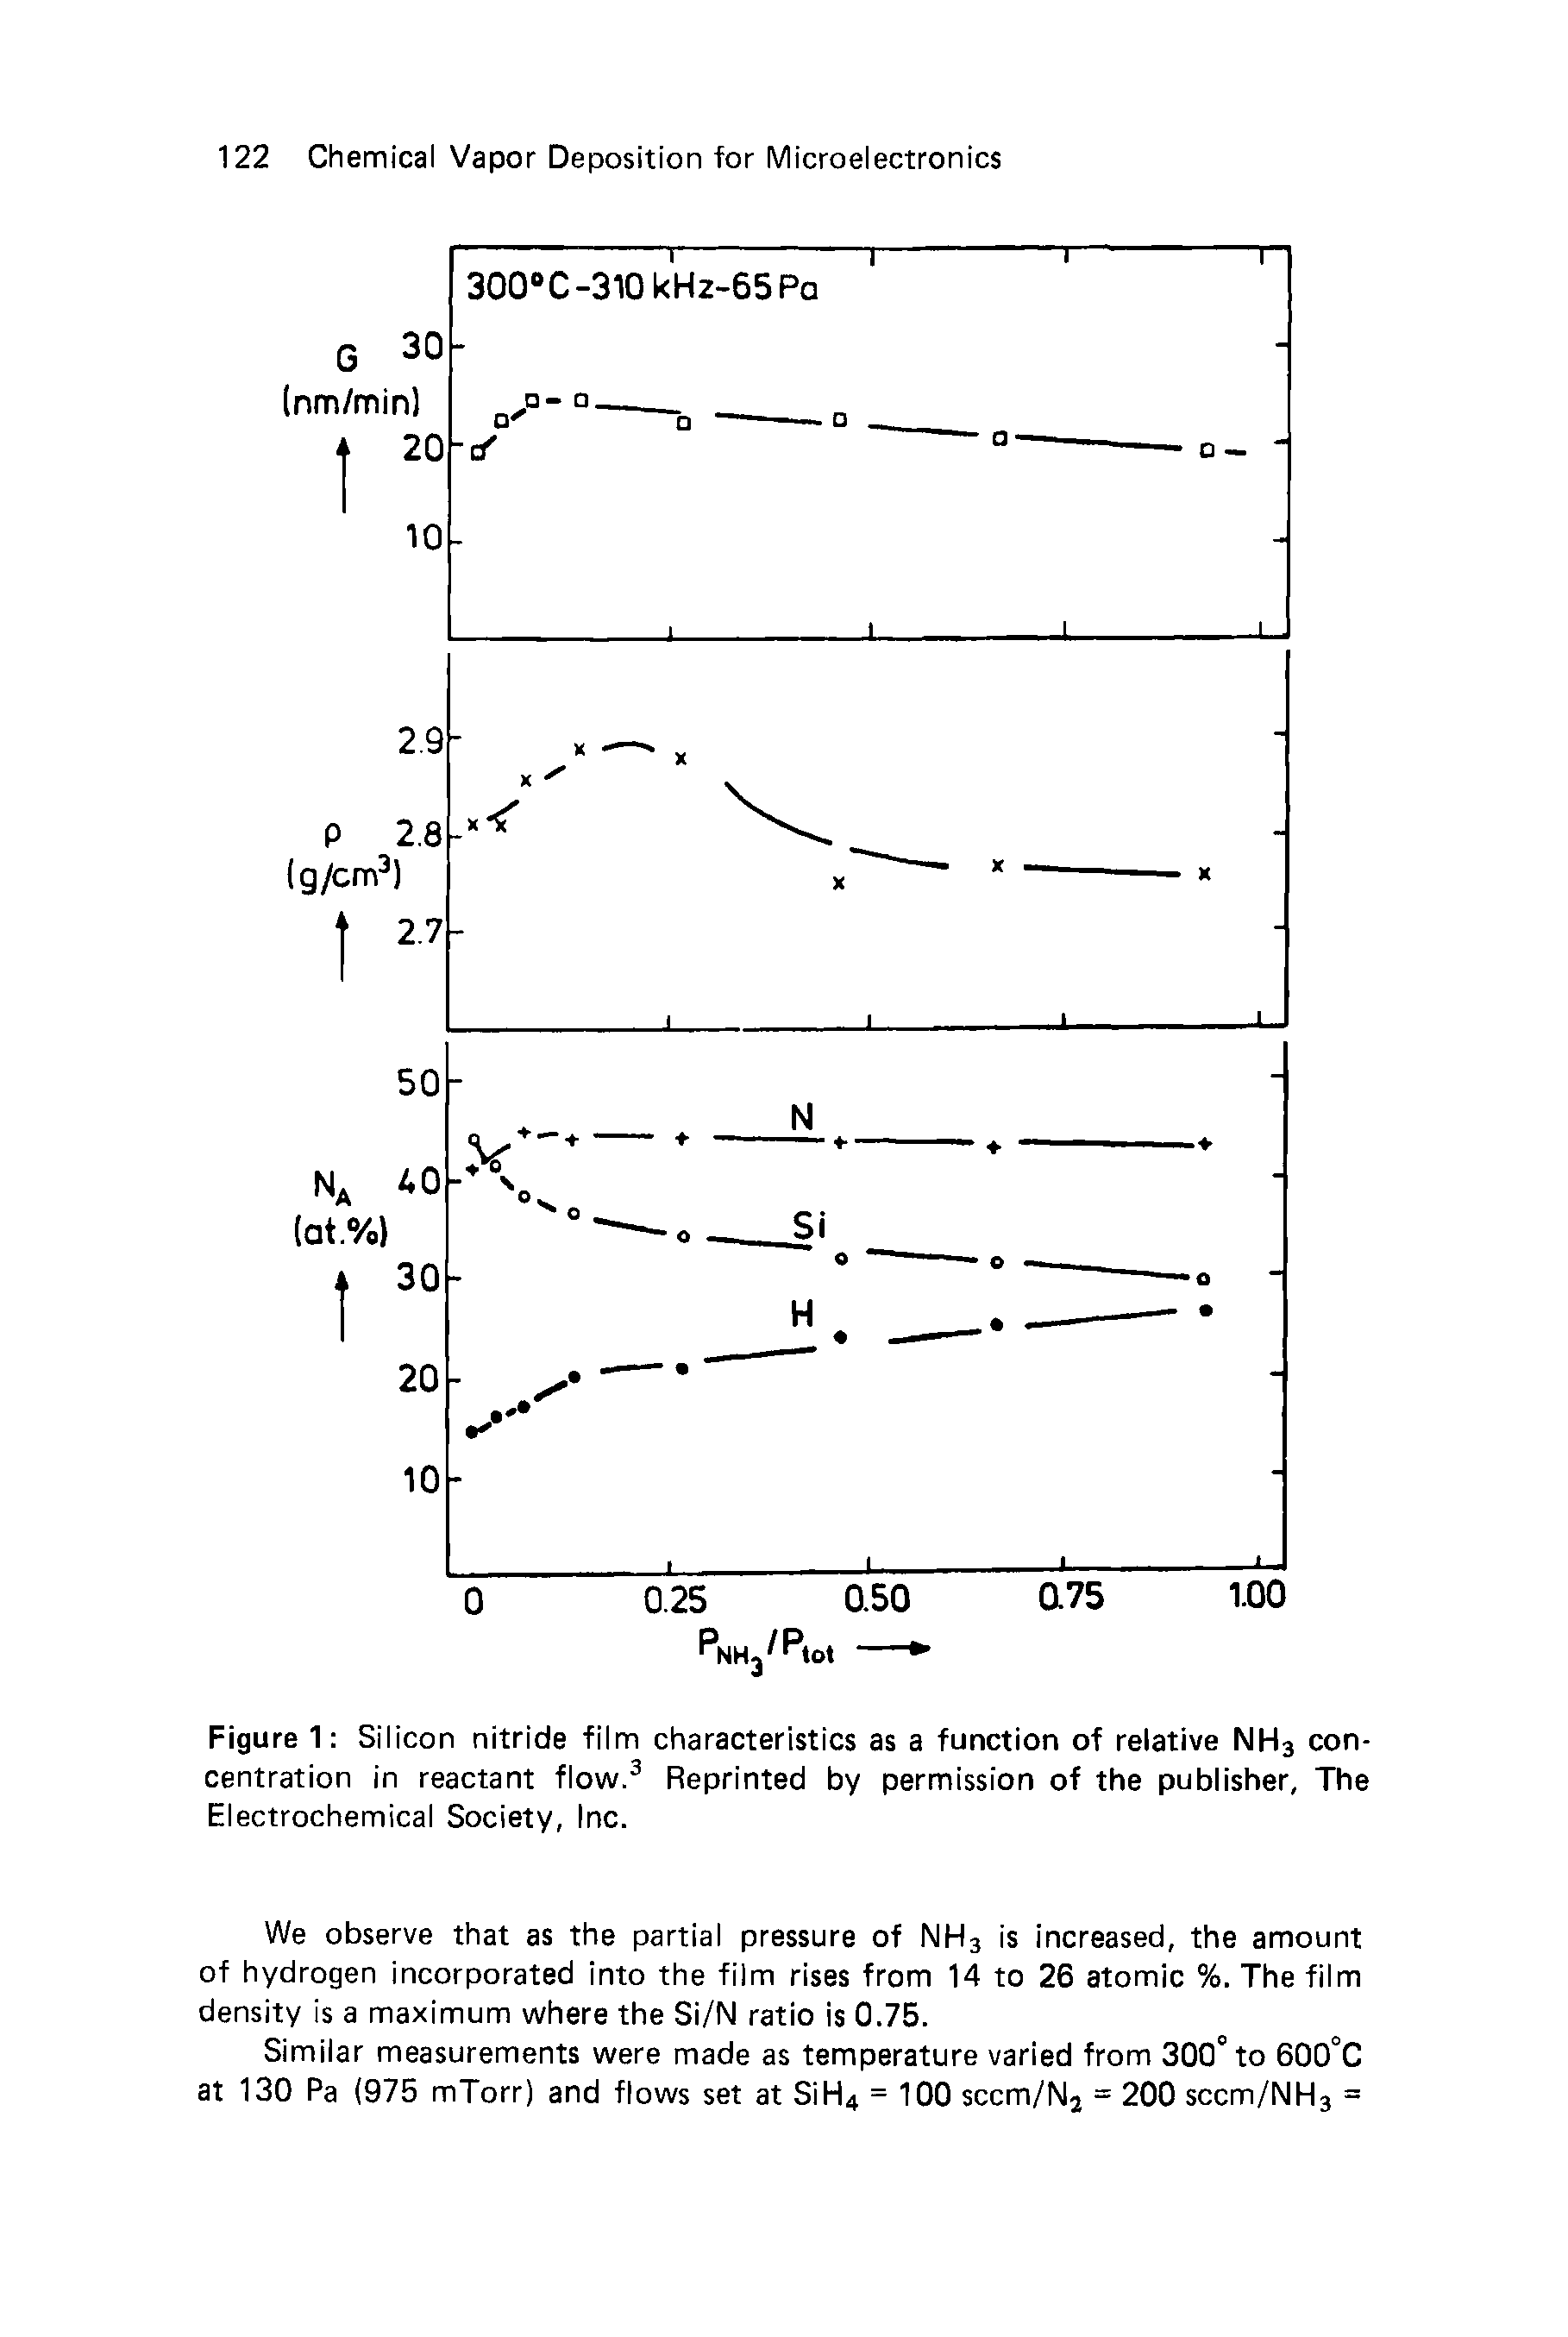 Figure 1 Silicon nitride film characteristics as a function of relative NH3 concentration in reactant flow.3 Reprinted by permission of the publisher, The Electrochemical Society, Inc.